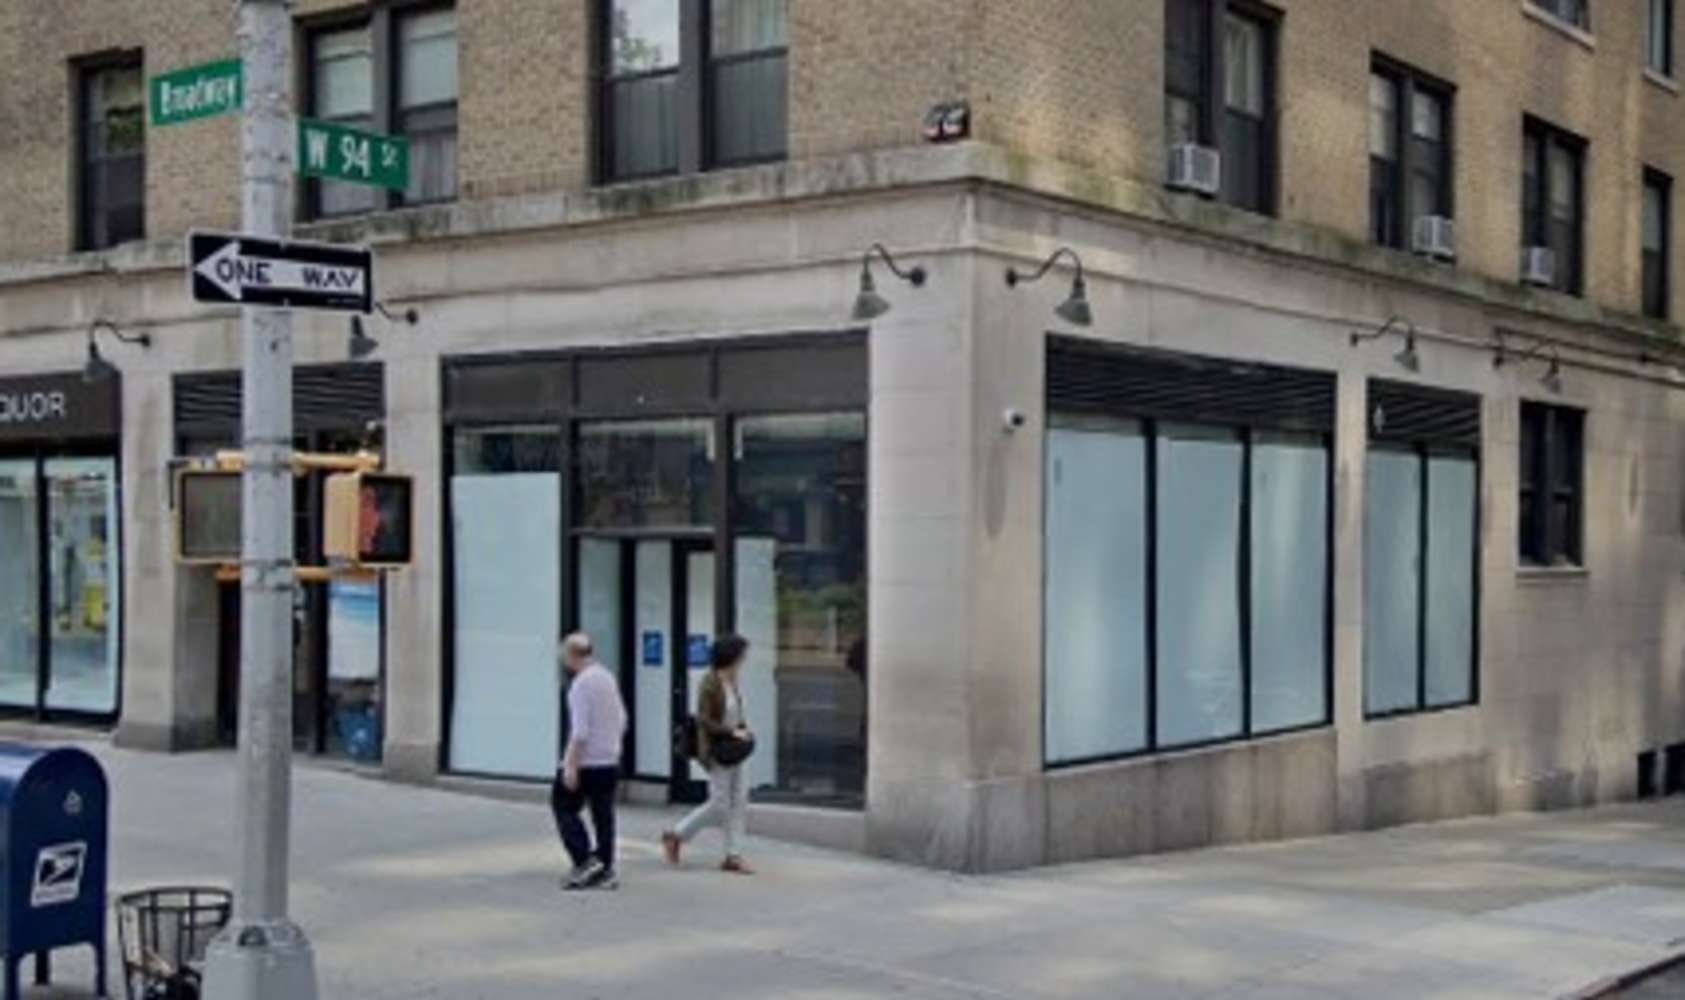 Retail New york - Bank site for sublease 8116072 - 94TH & BROADWAY - New York, NY